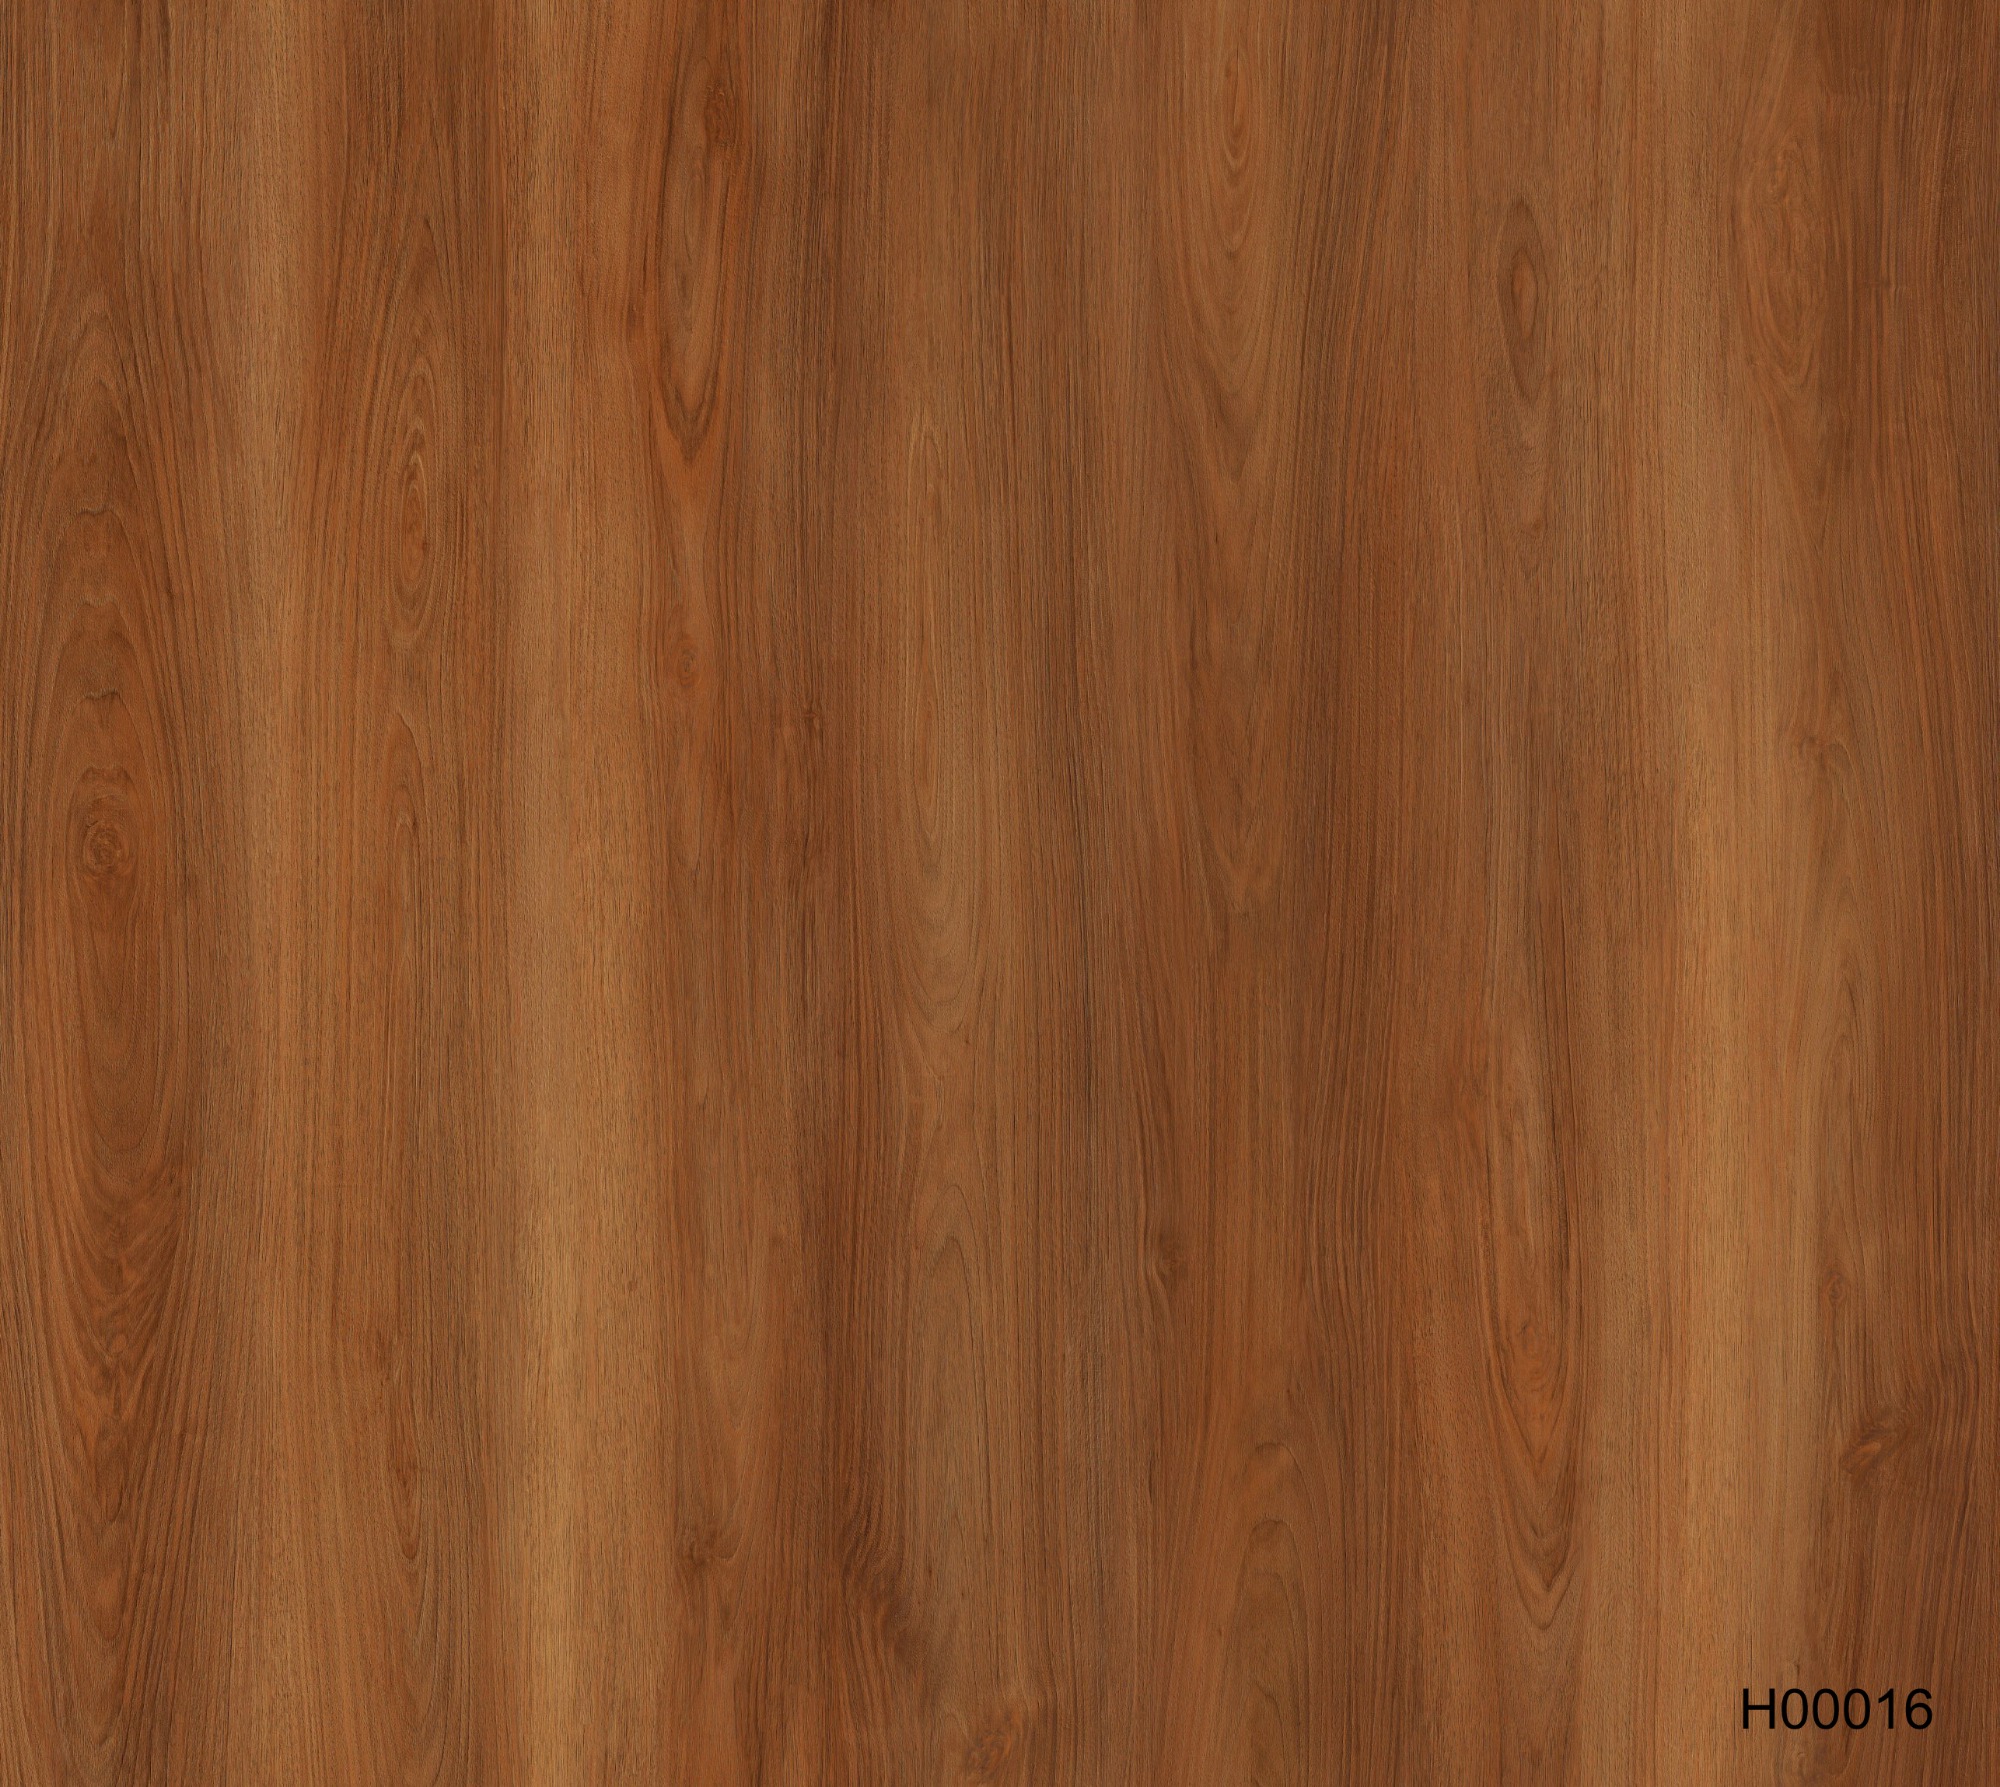 H00016 Melamine paper with wood grain